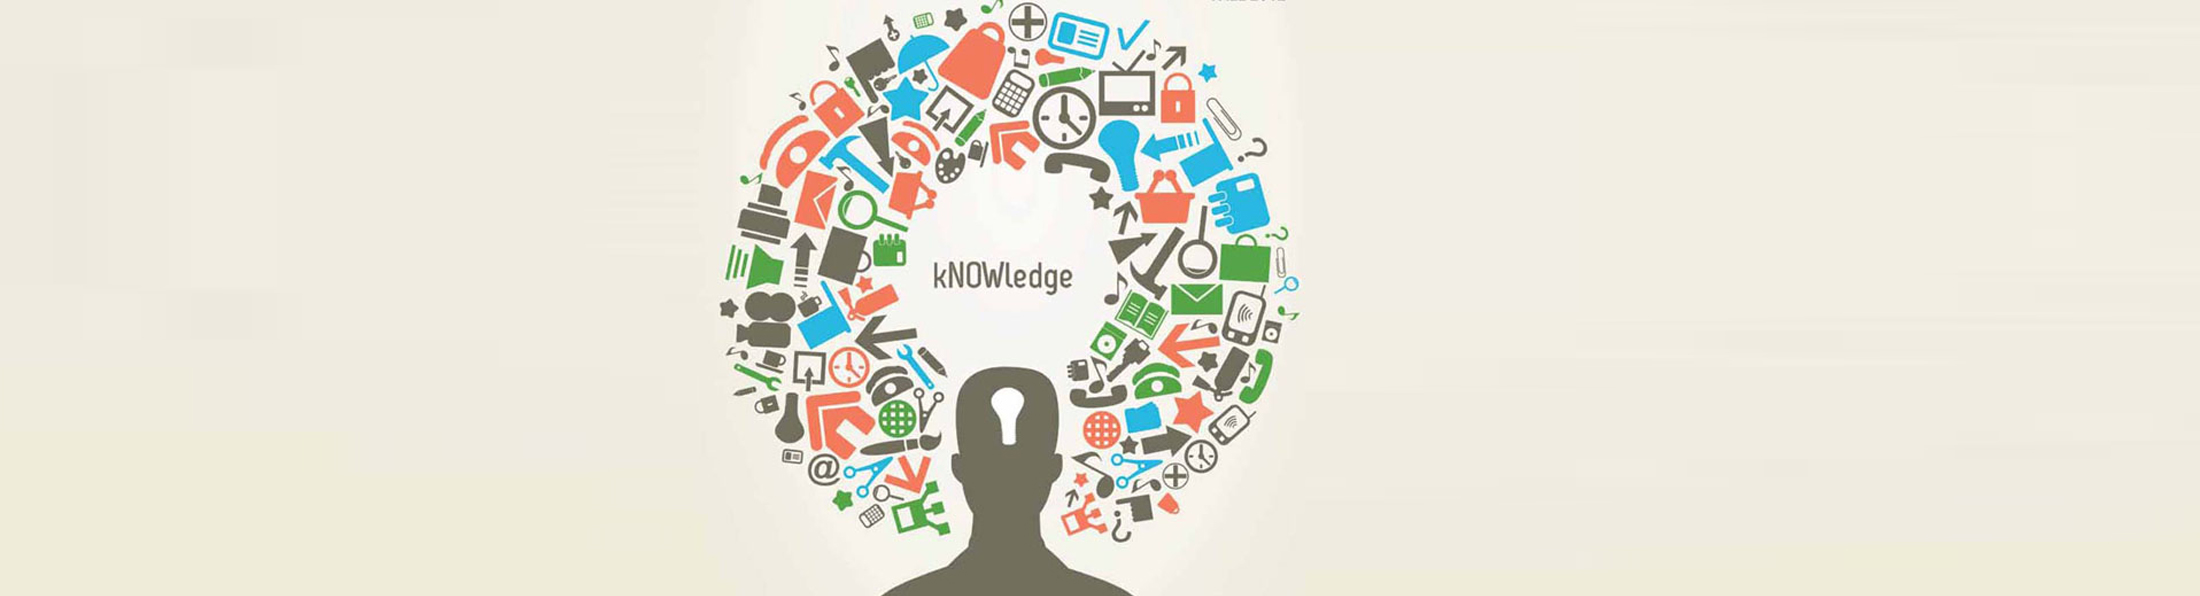 Metamorphose information to knowledge when e-learning